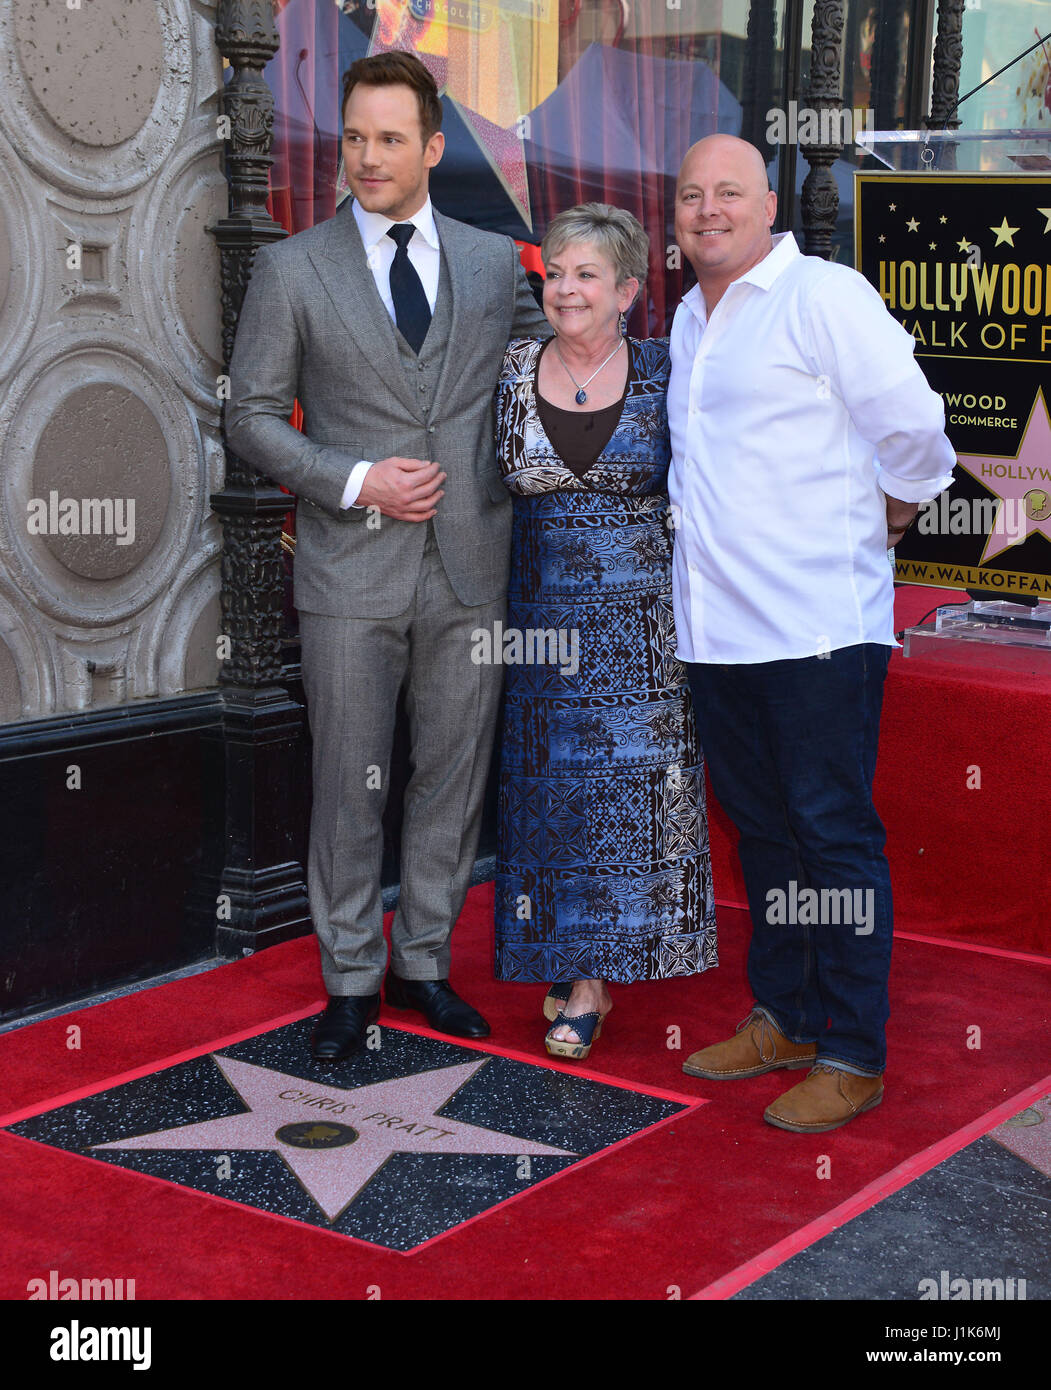 Chris Pratt Star 055 and mom at the Chris Pratt Star ceremony on the Hollywood Walk of Fame in Los Angeles. April 21, 2017 Stock Photo